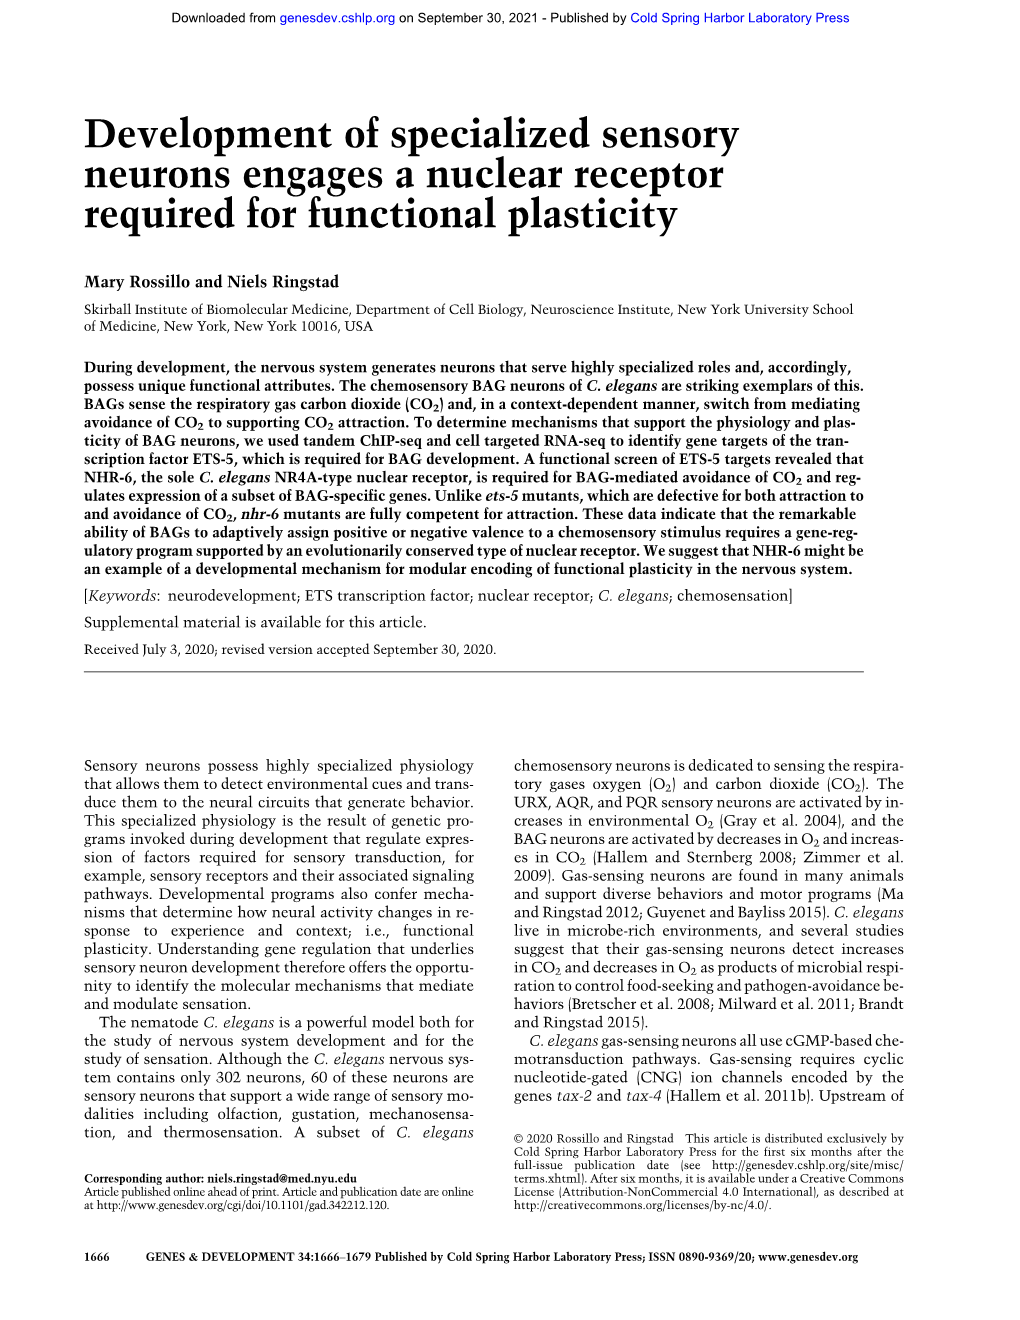 Development of Specialized Sensory Neurons Engages a Nuclear Receptor Required for Functional Plasticity